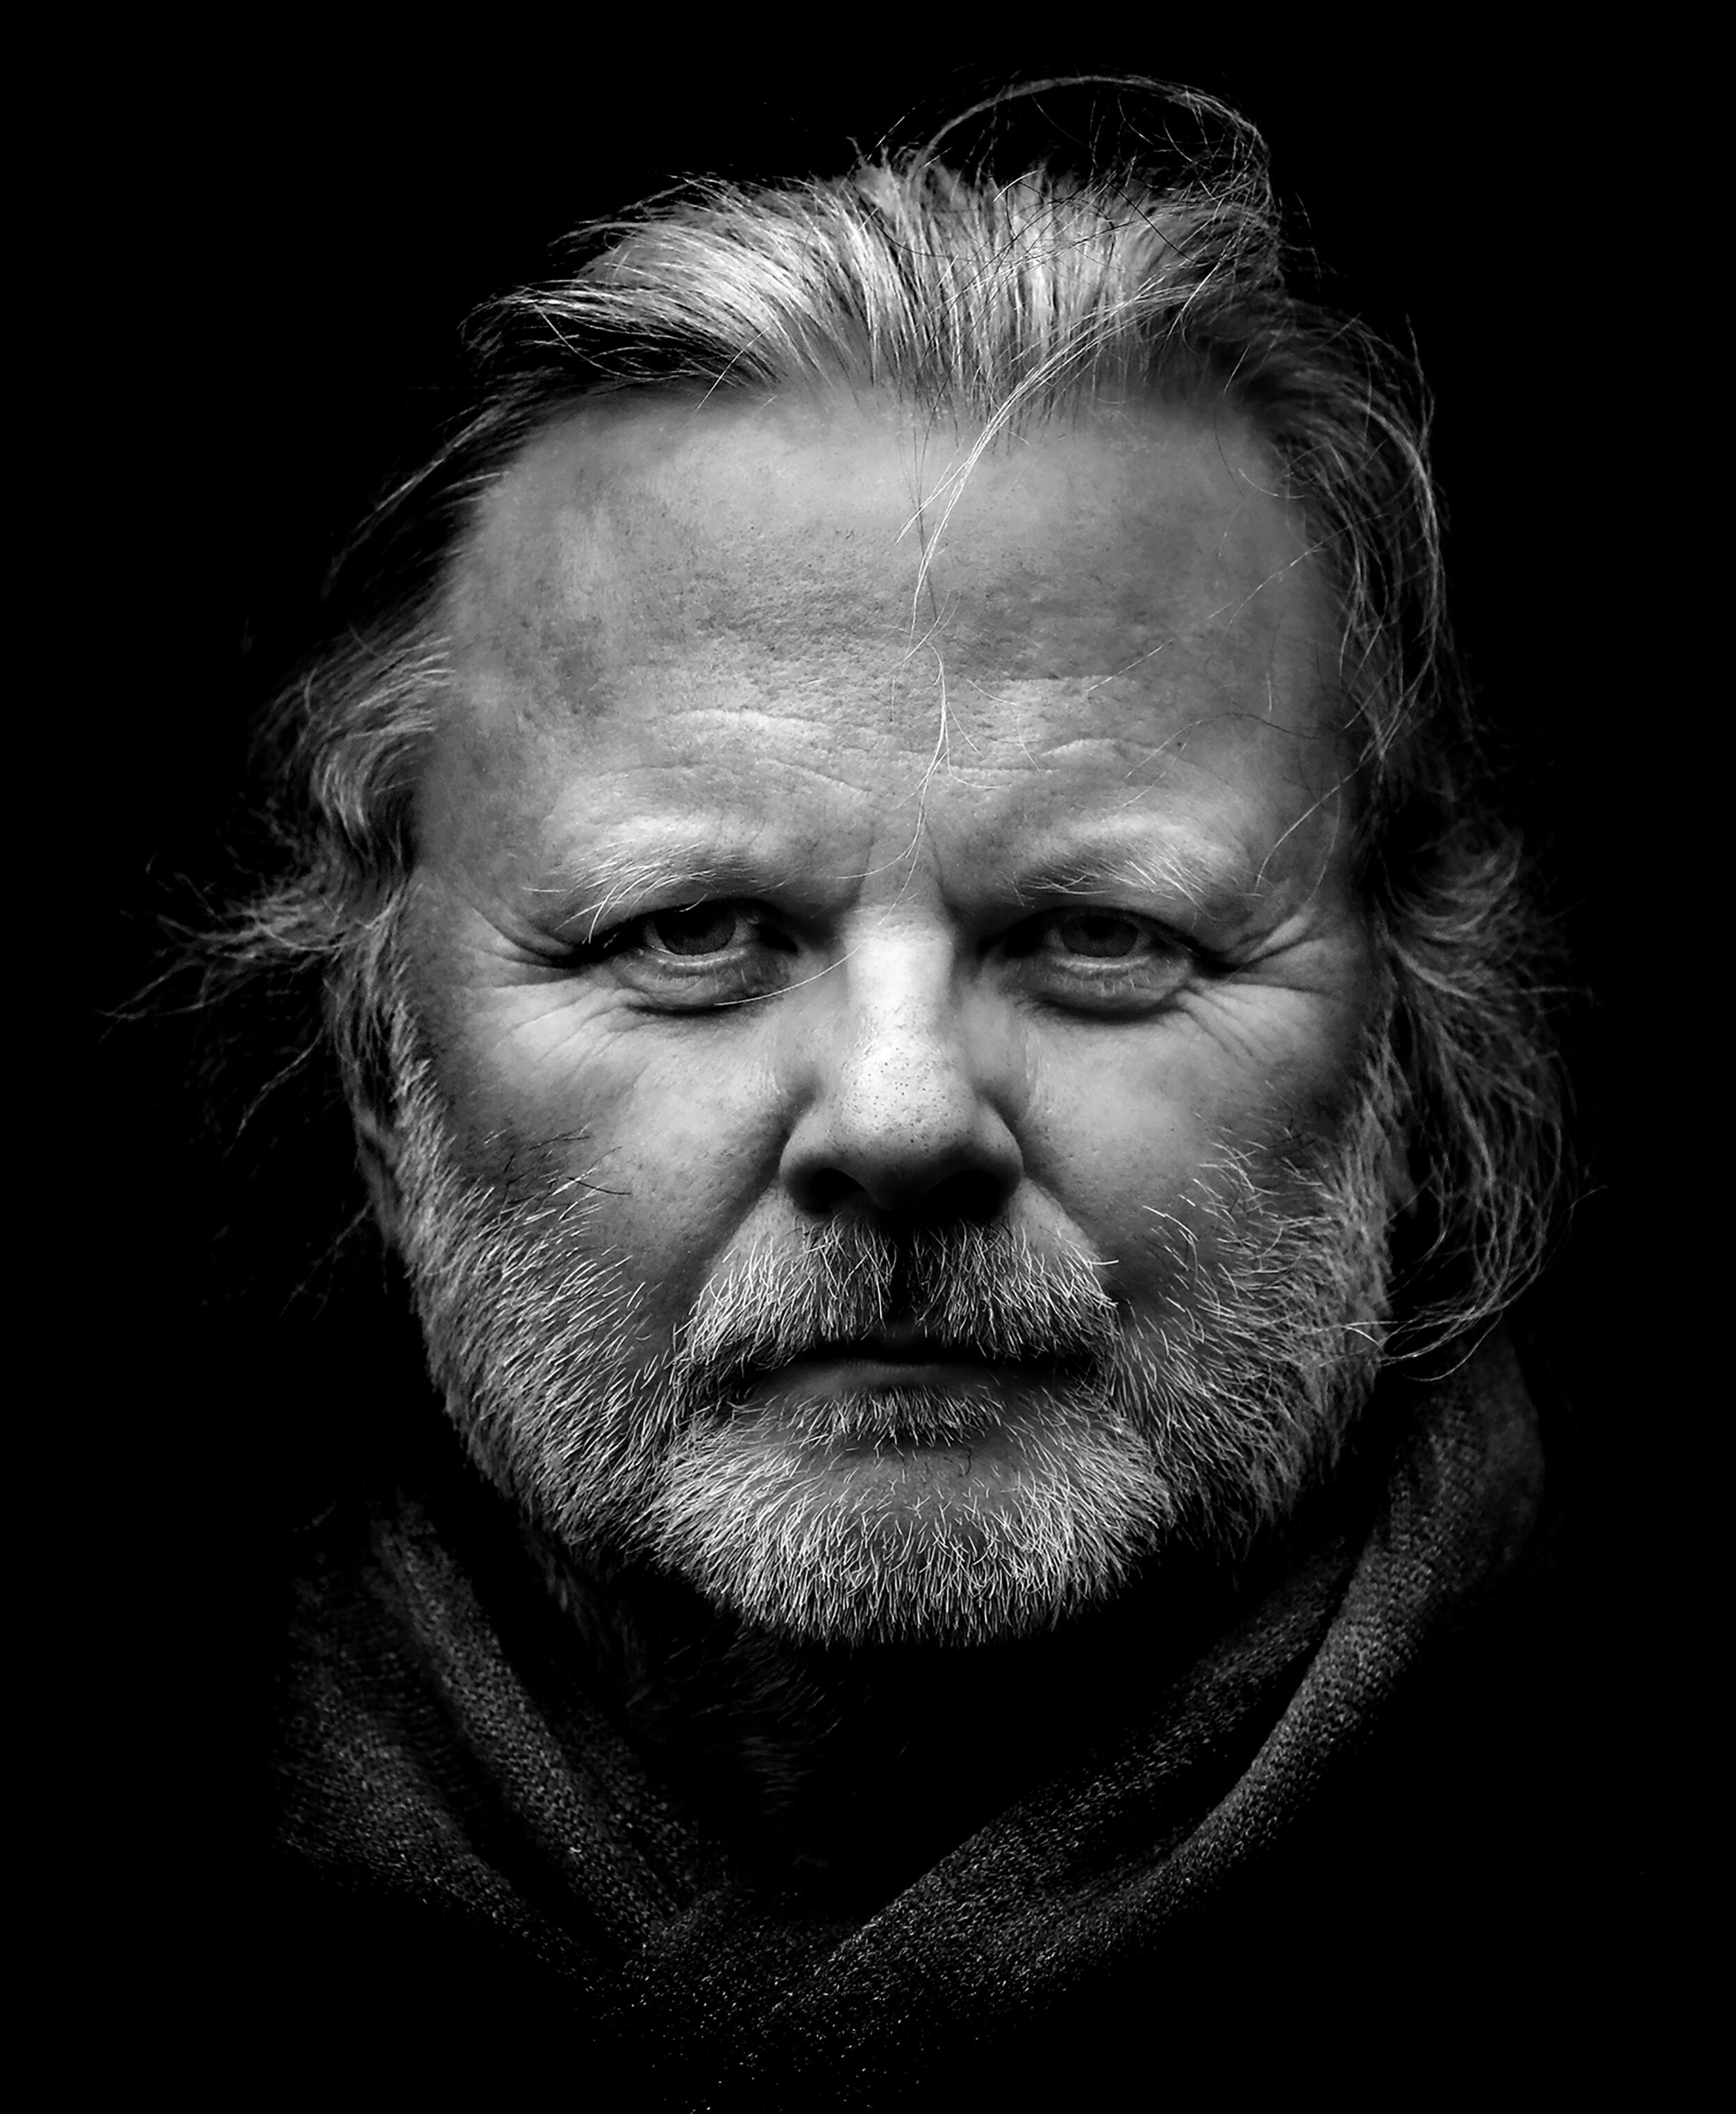 Black and white portrait of Nobel laureate Jon Fosse wearing a black coat and scarf